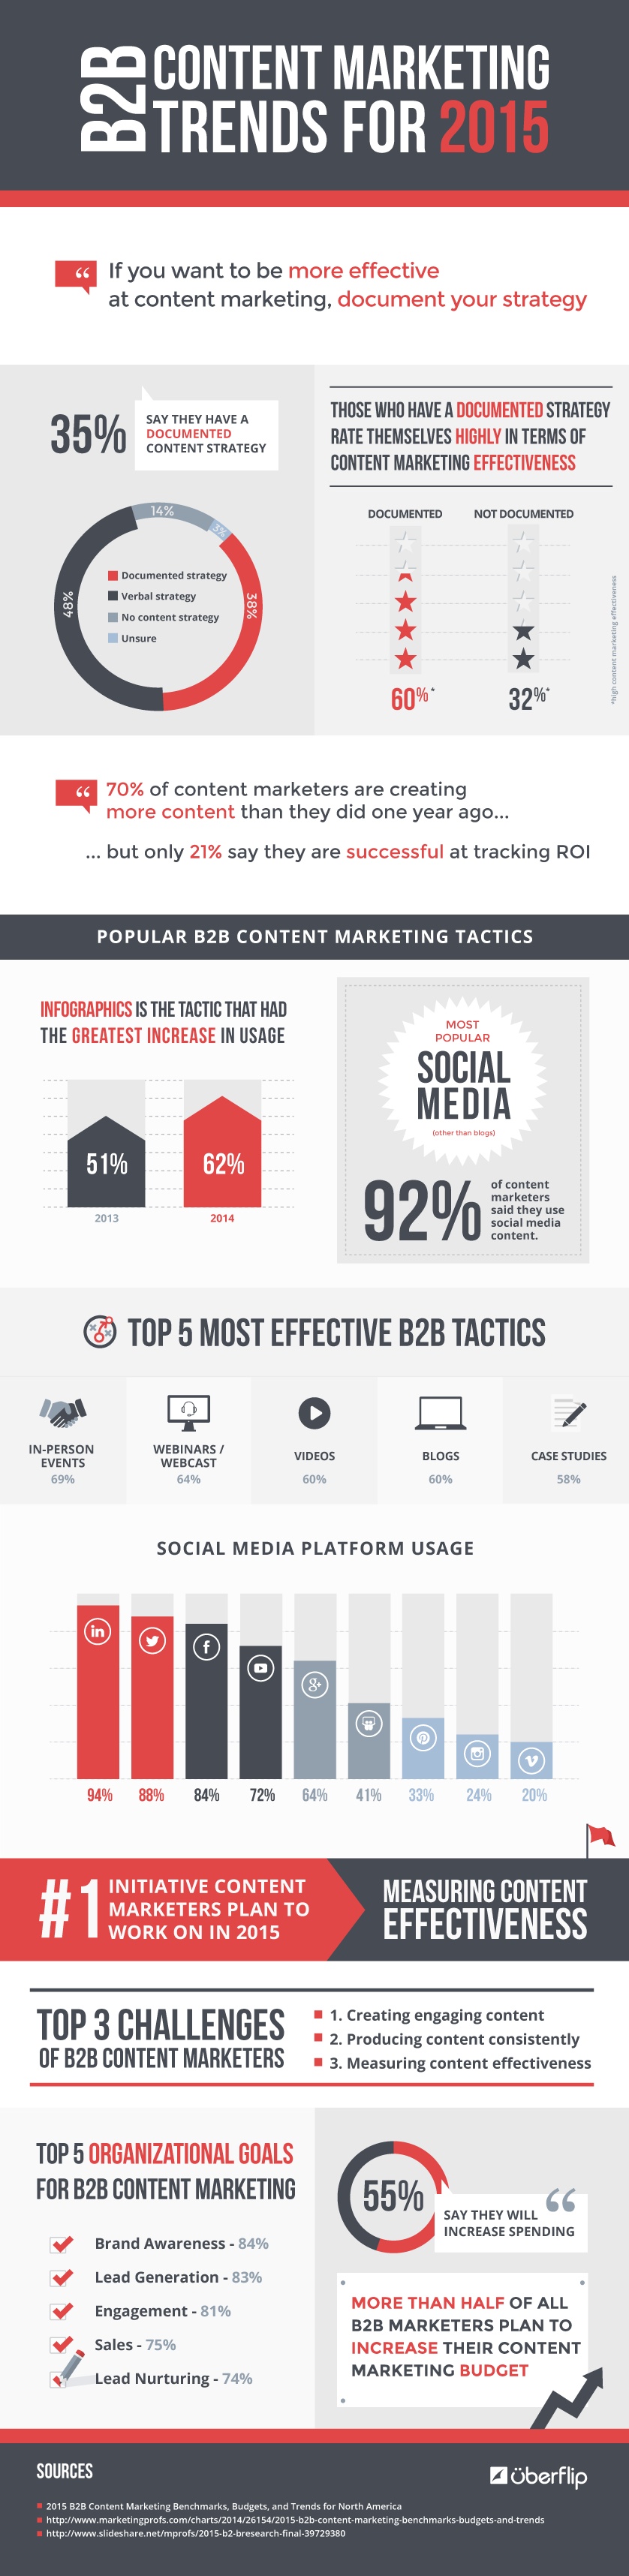 Content marketing trends B2B 2015 infographic